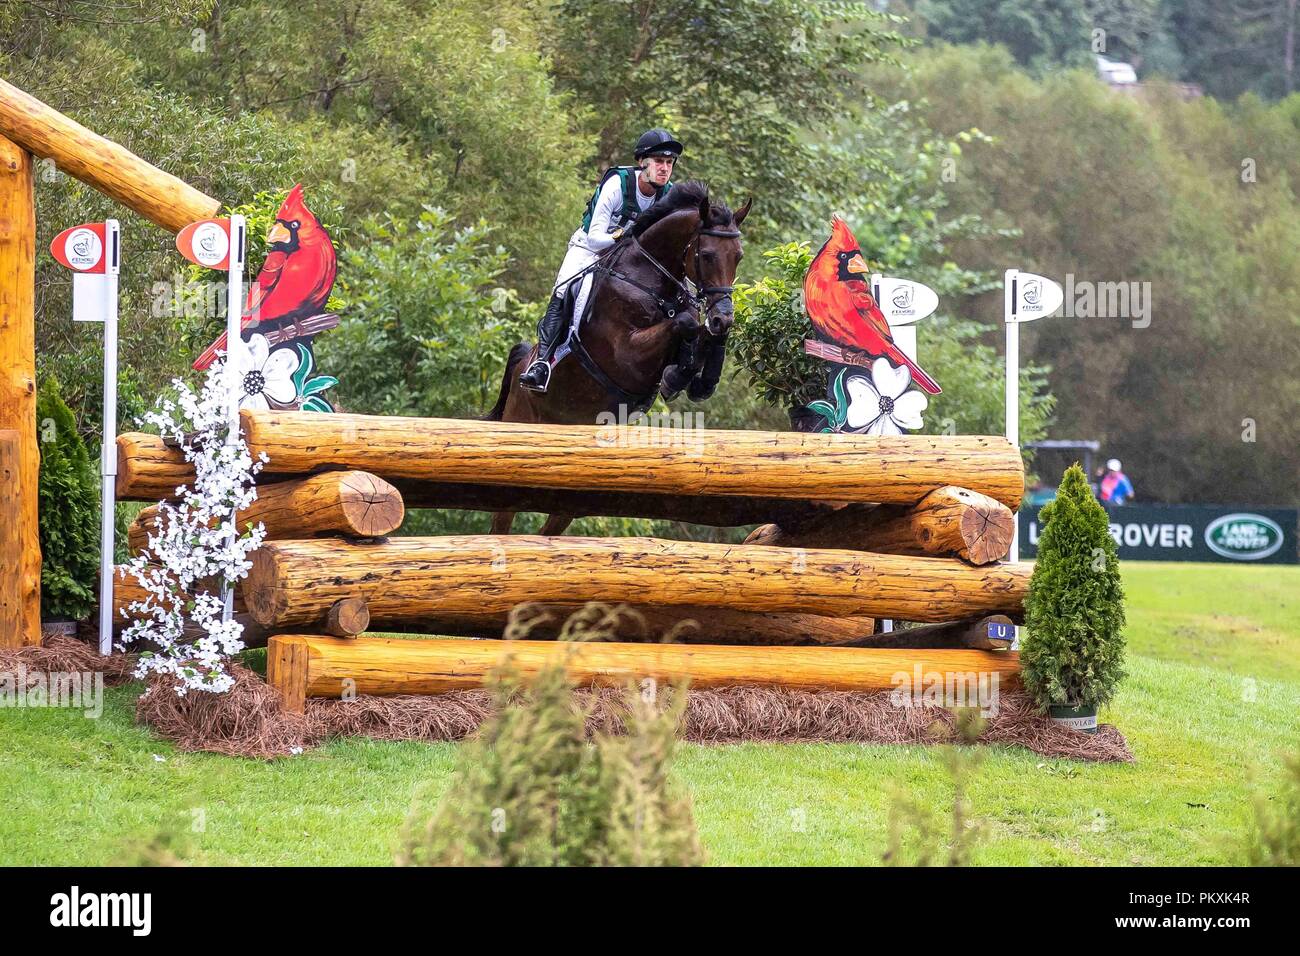 North Carolina, USA. 15th Sept 2018. Felix Vogg. Colero. SUI. Eventing Cross country Day 5. World Equestrian Games. WEG 2018 Tryon. North Carolina. USA. 15/09/2018. Credit: Sport In Pictures/Alamy Live News Stock Photo